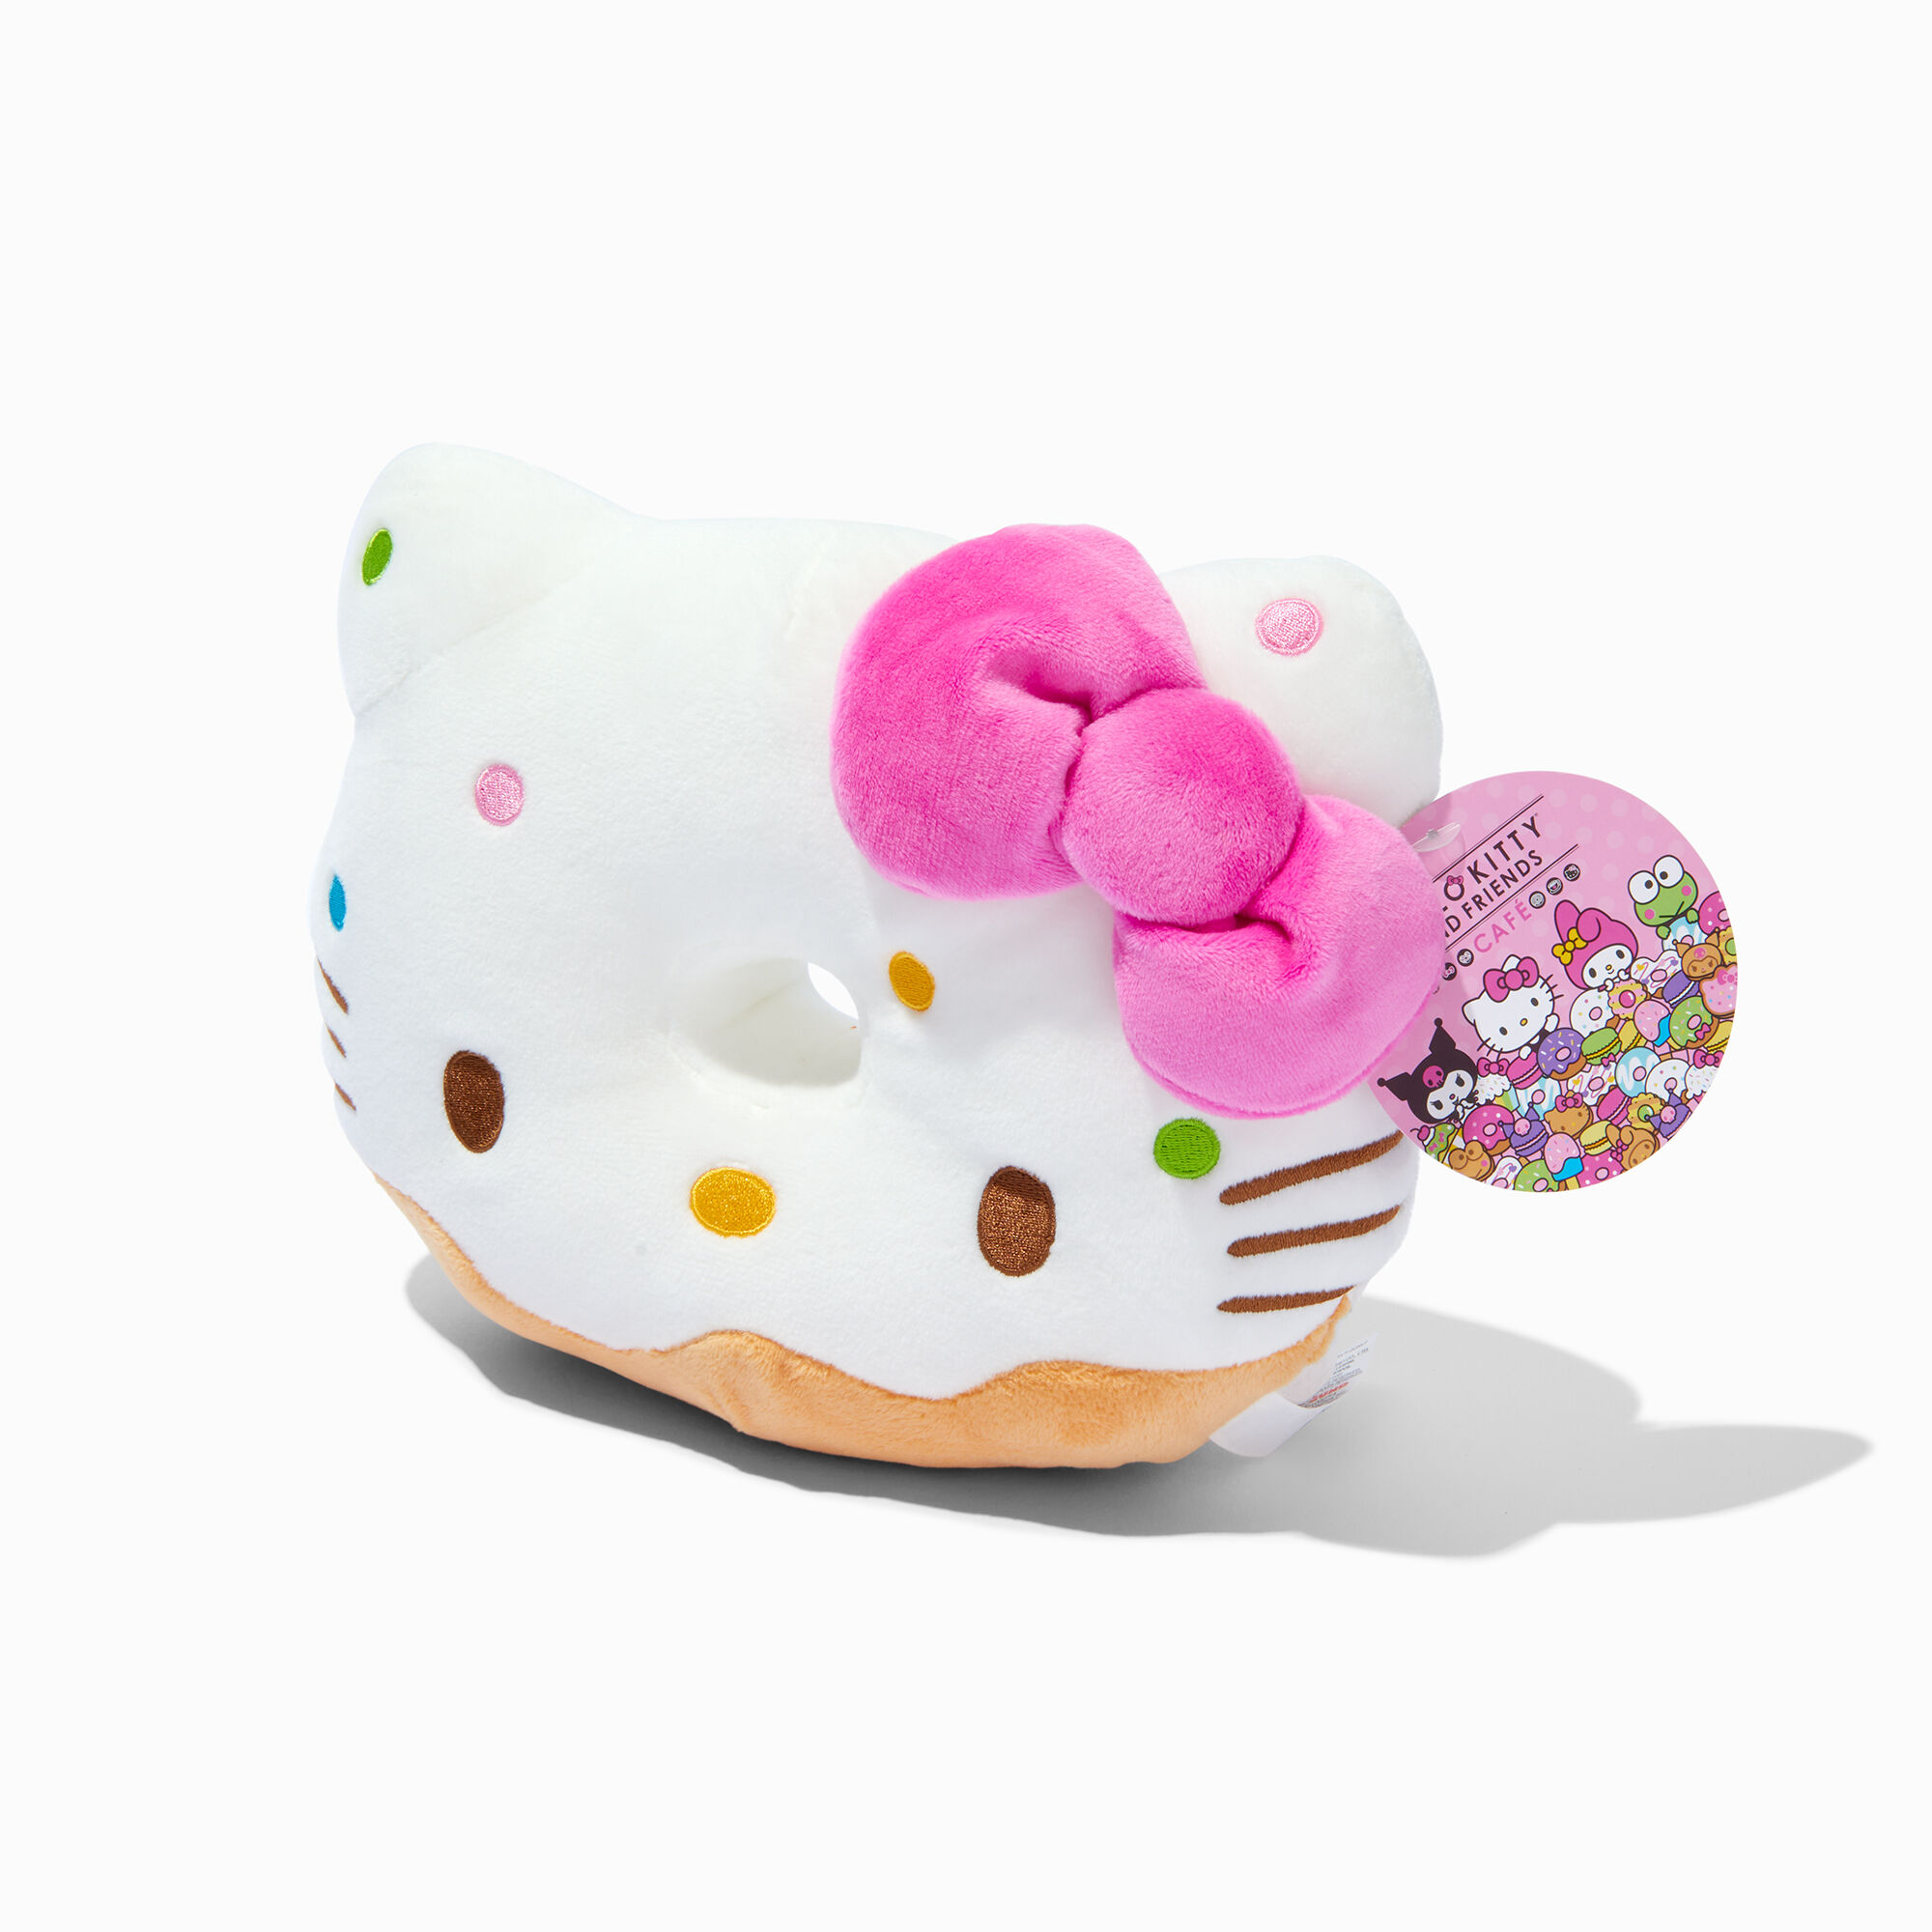 View Claires Hello Kitty And Friends Cafe 8 Donut Soft Toy information